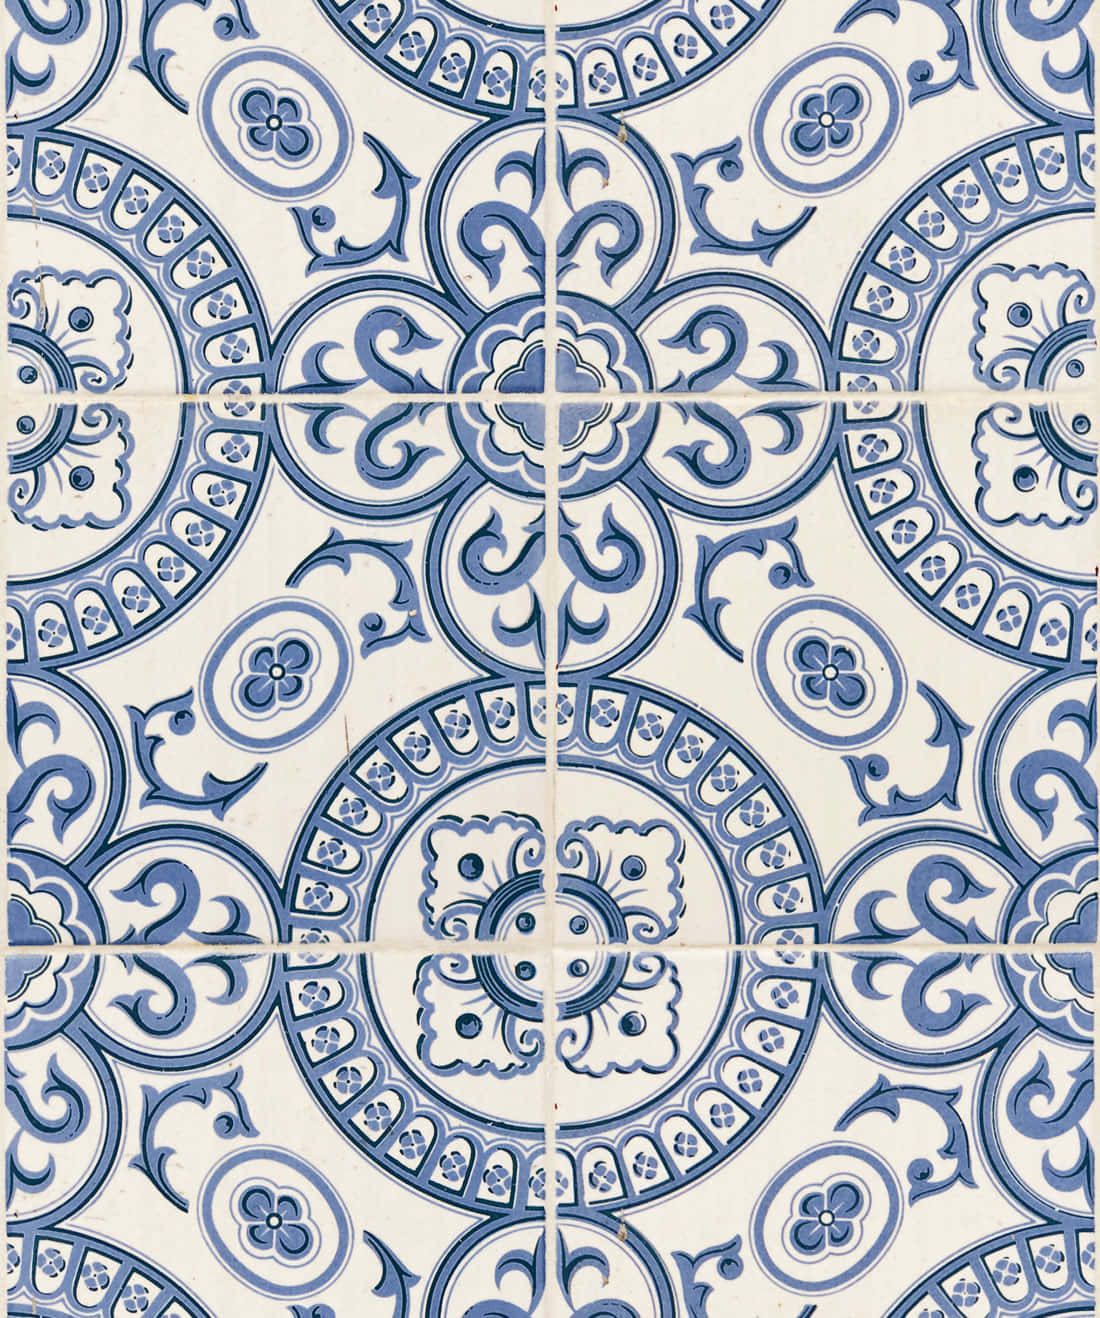 A Blue And White Tile With A Circular Design